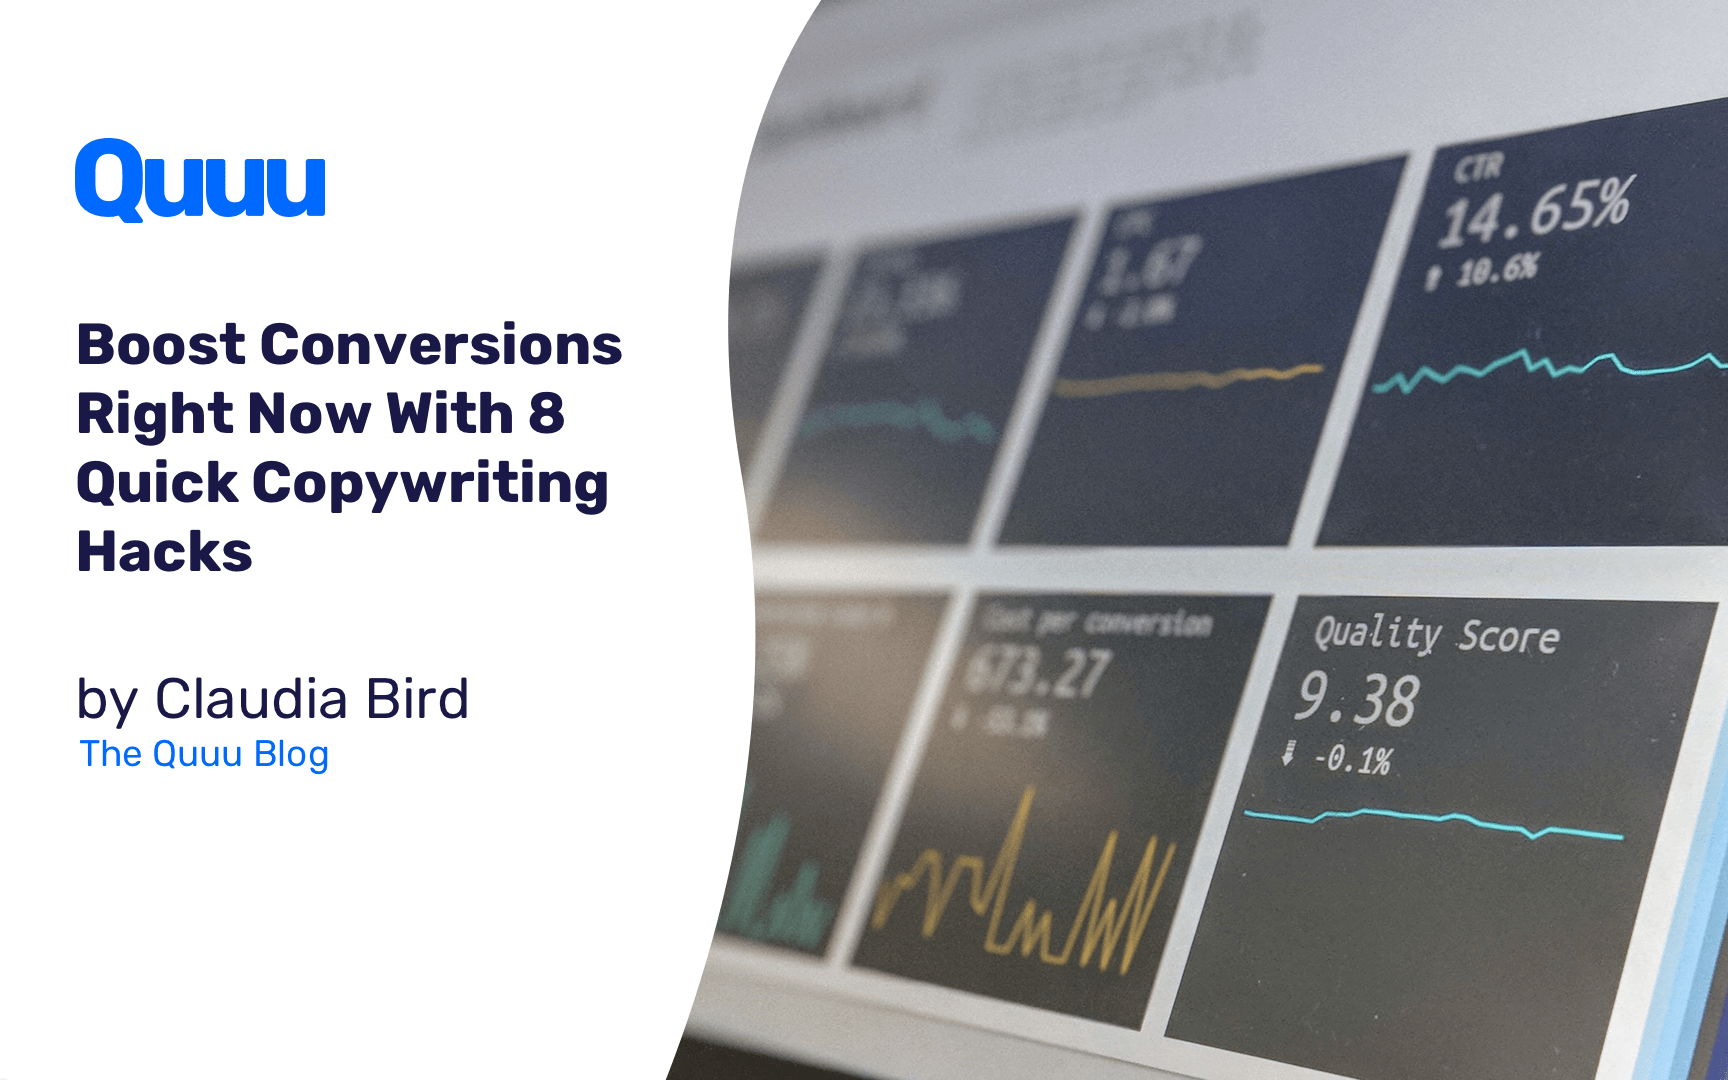 Boost Conversions Right Now With 8 Quick Copywriting Hacks